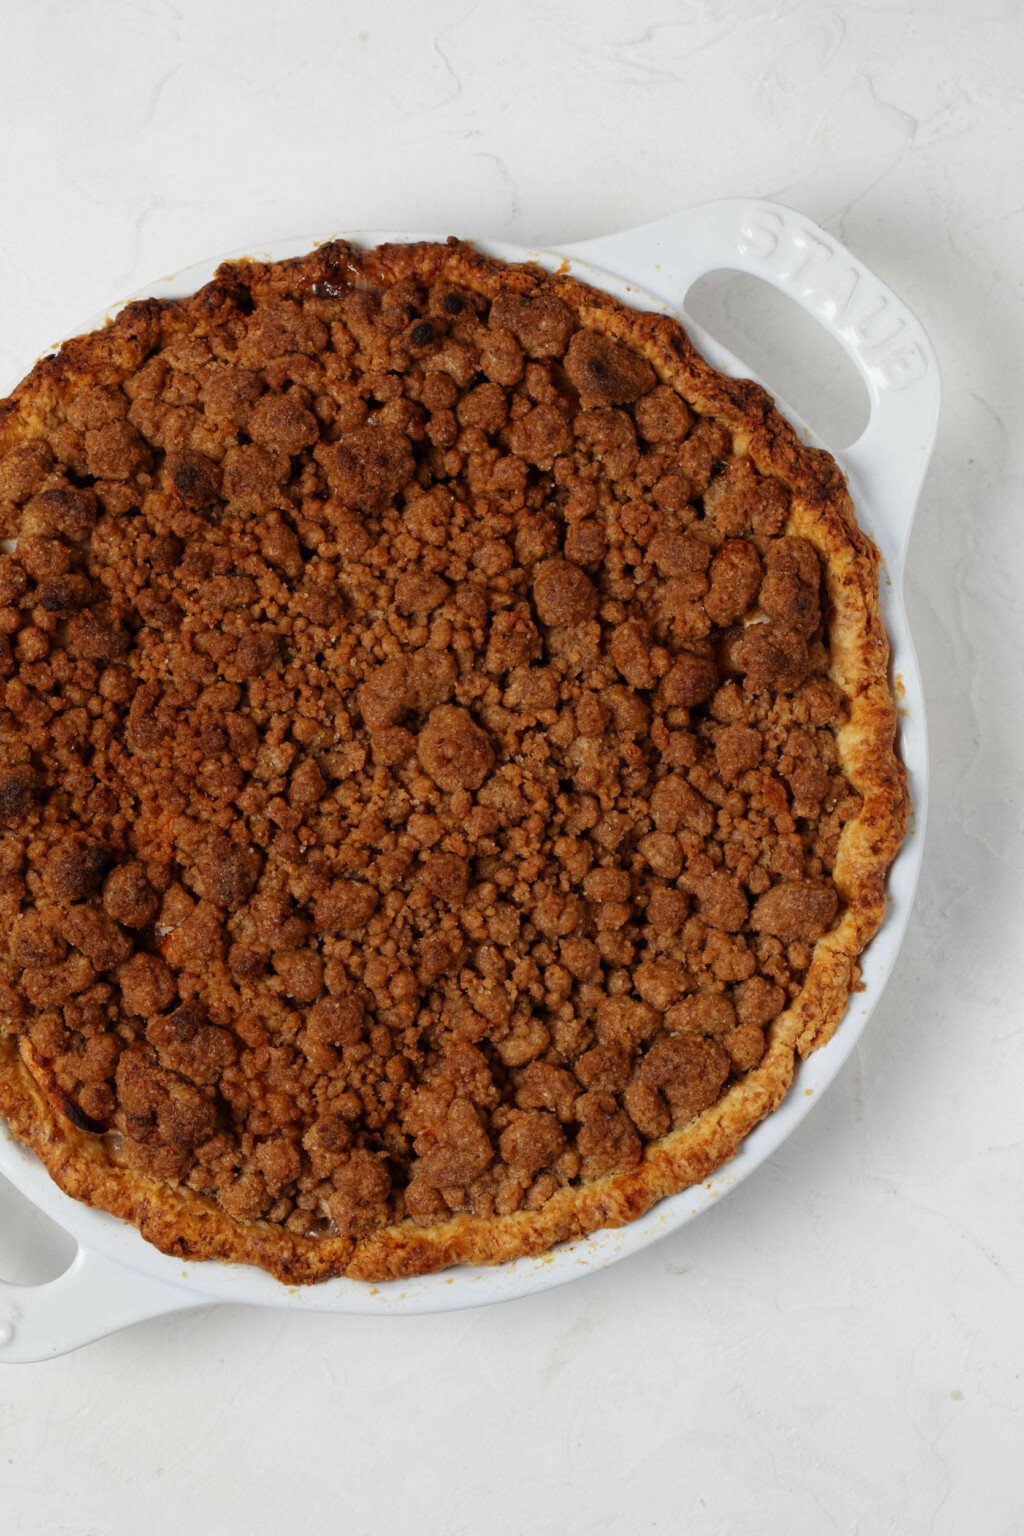 An overhead image of a vegan apple pie with streusel topping, which has just emerged from the oven in a golden brown state. The pie is in a white ceramic pie plate.